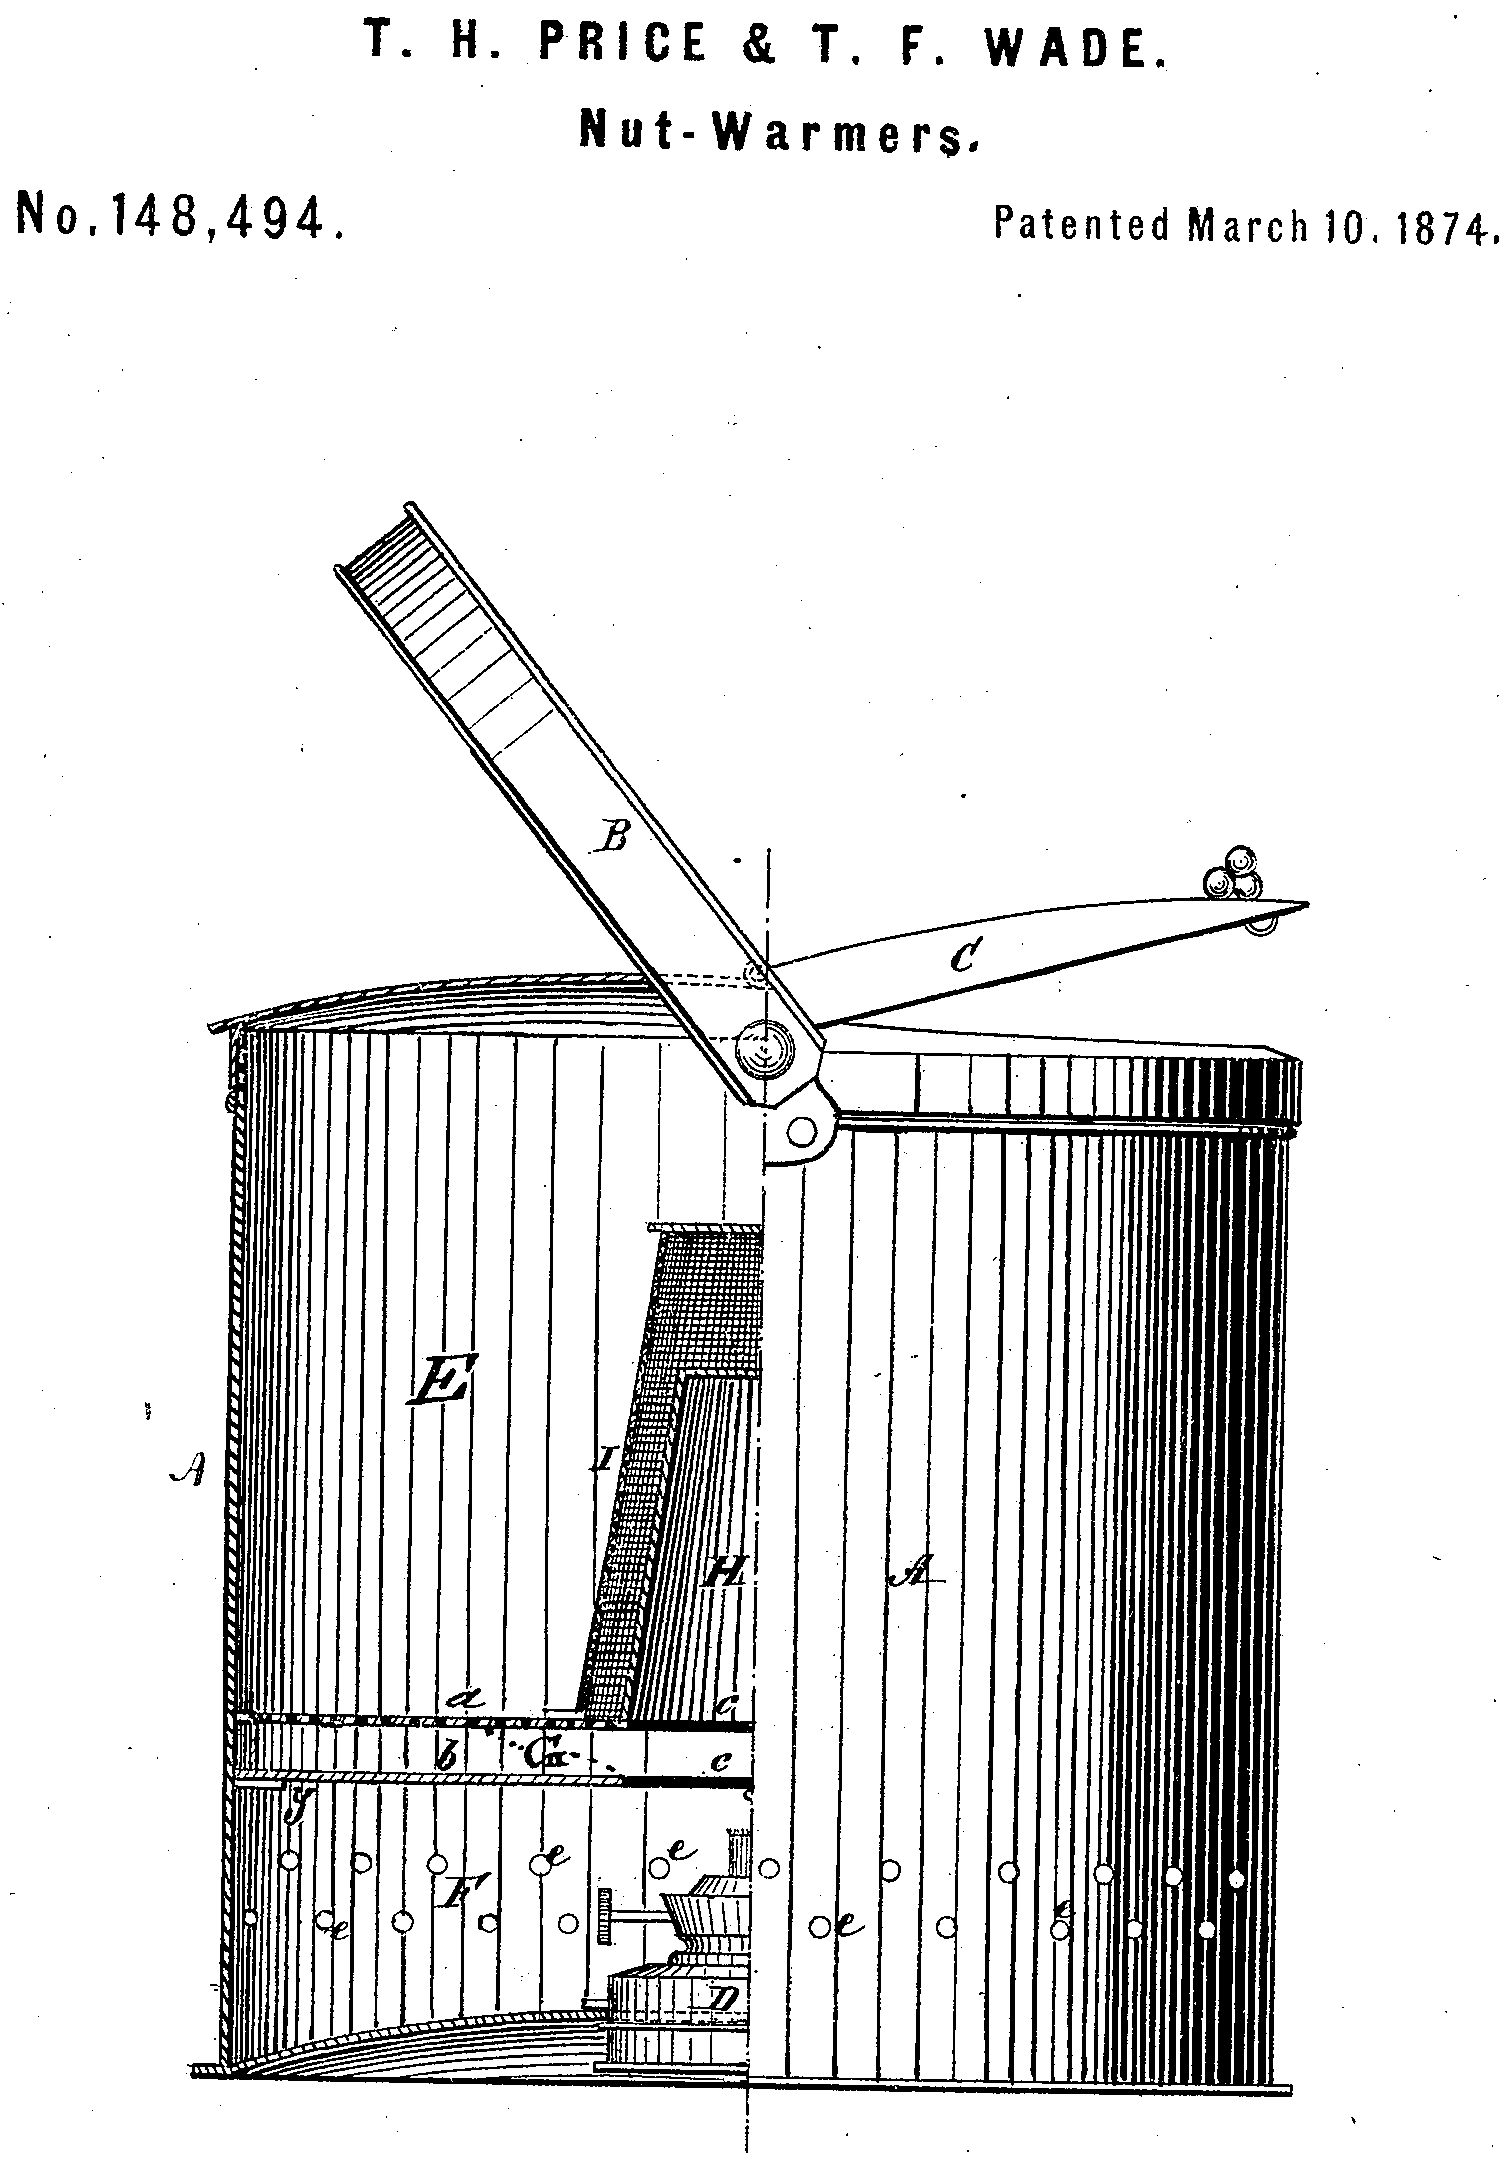 patent for nut-warmers